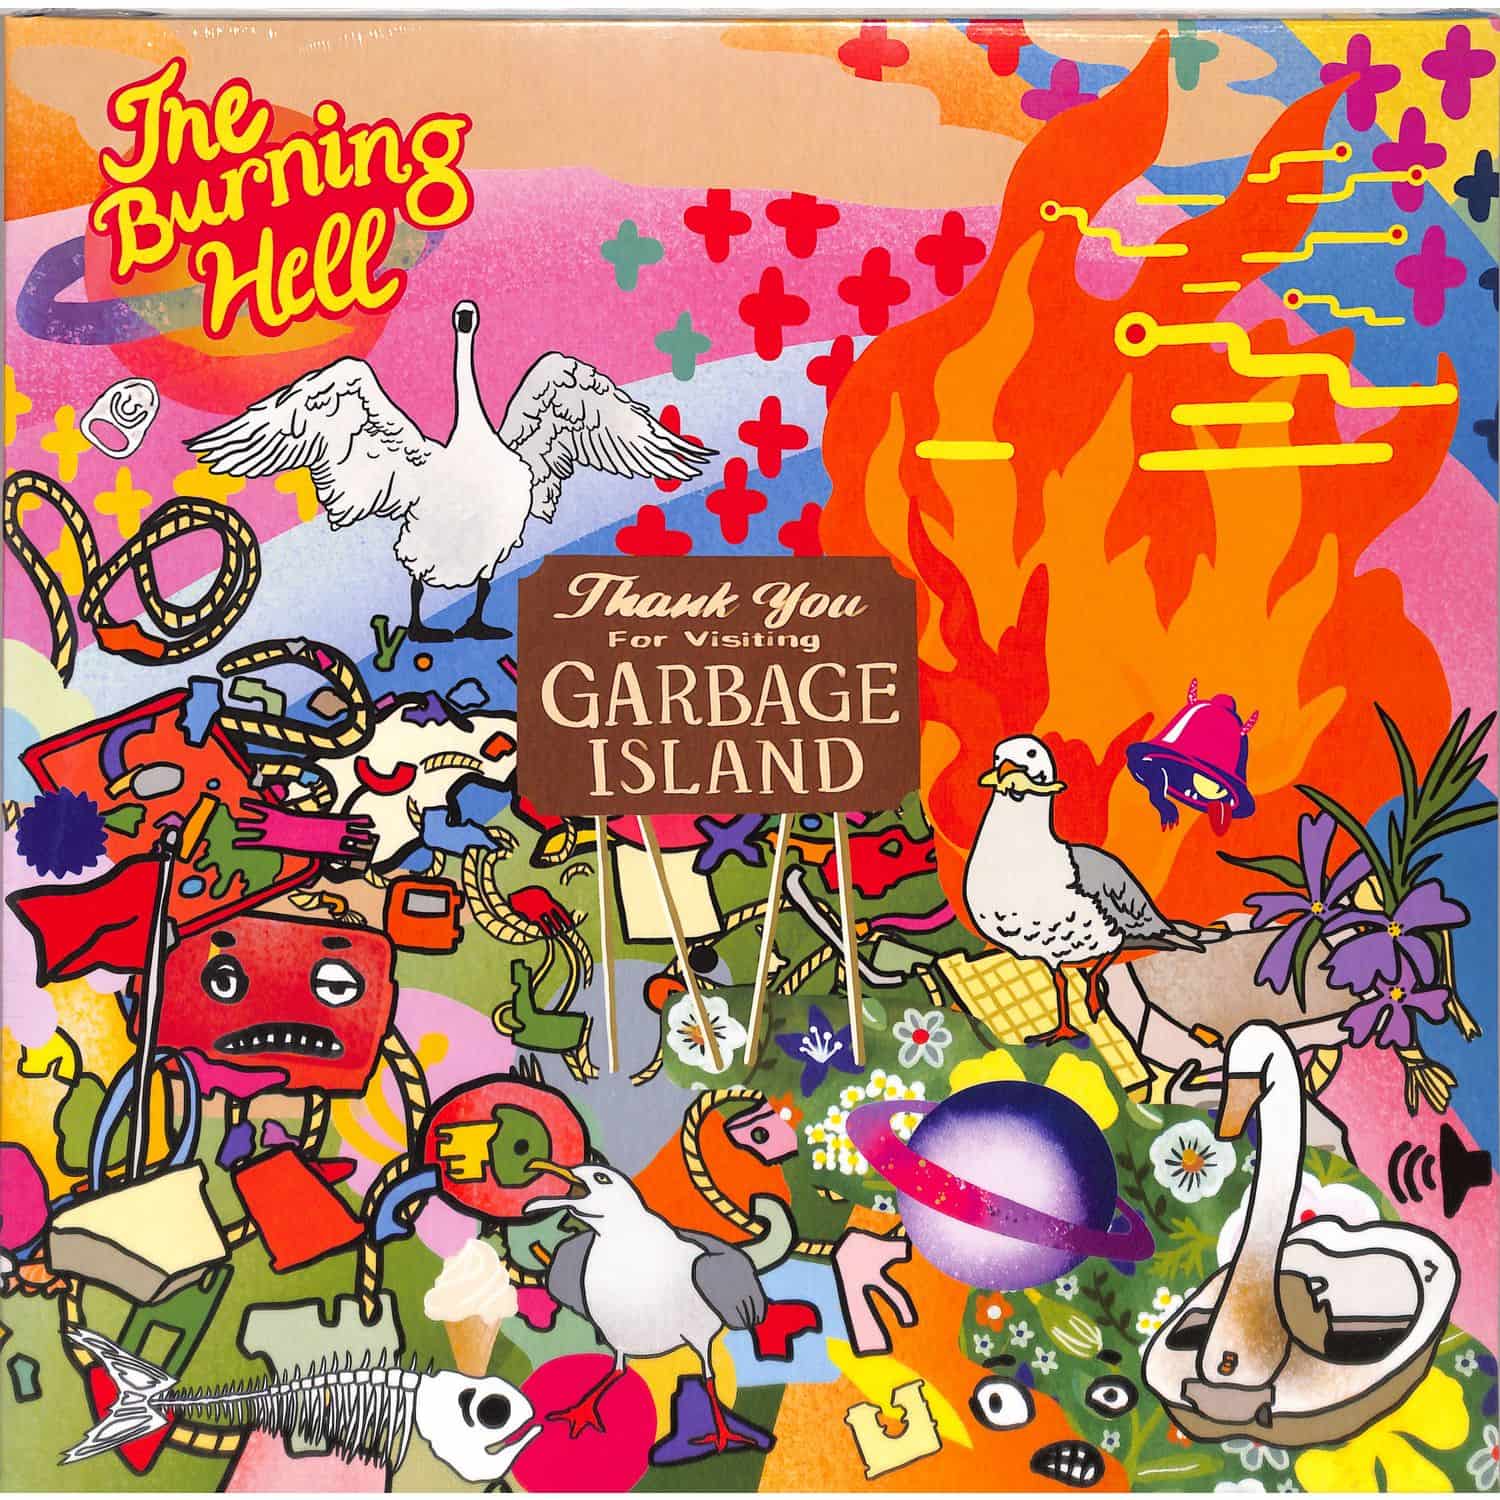 The Burning Hell - GARBAGE ISLAND 